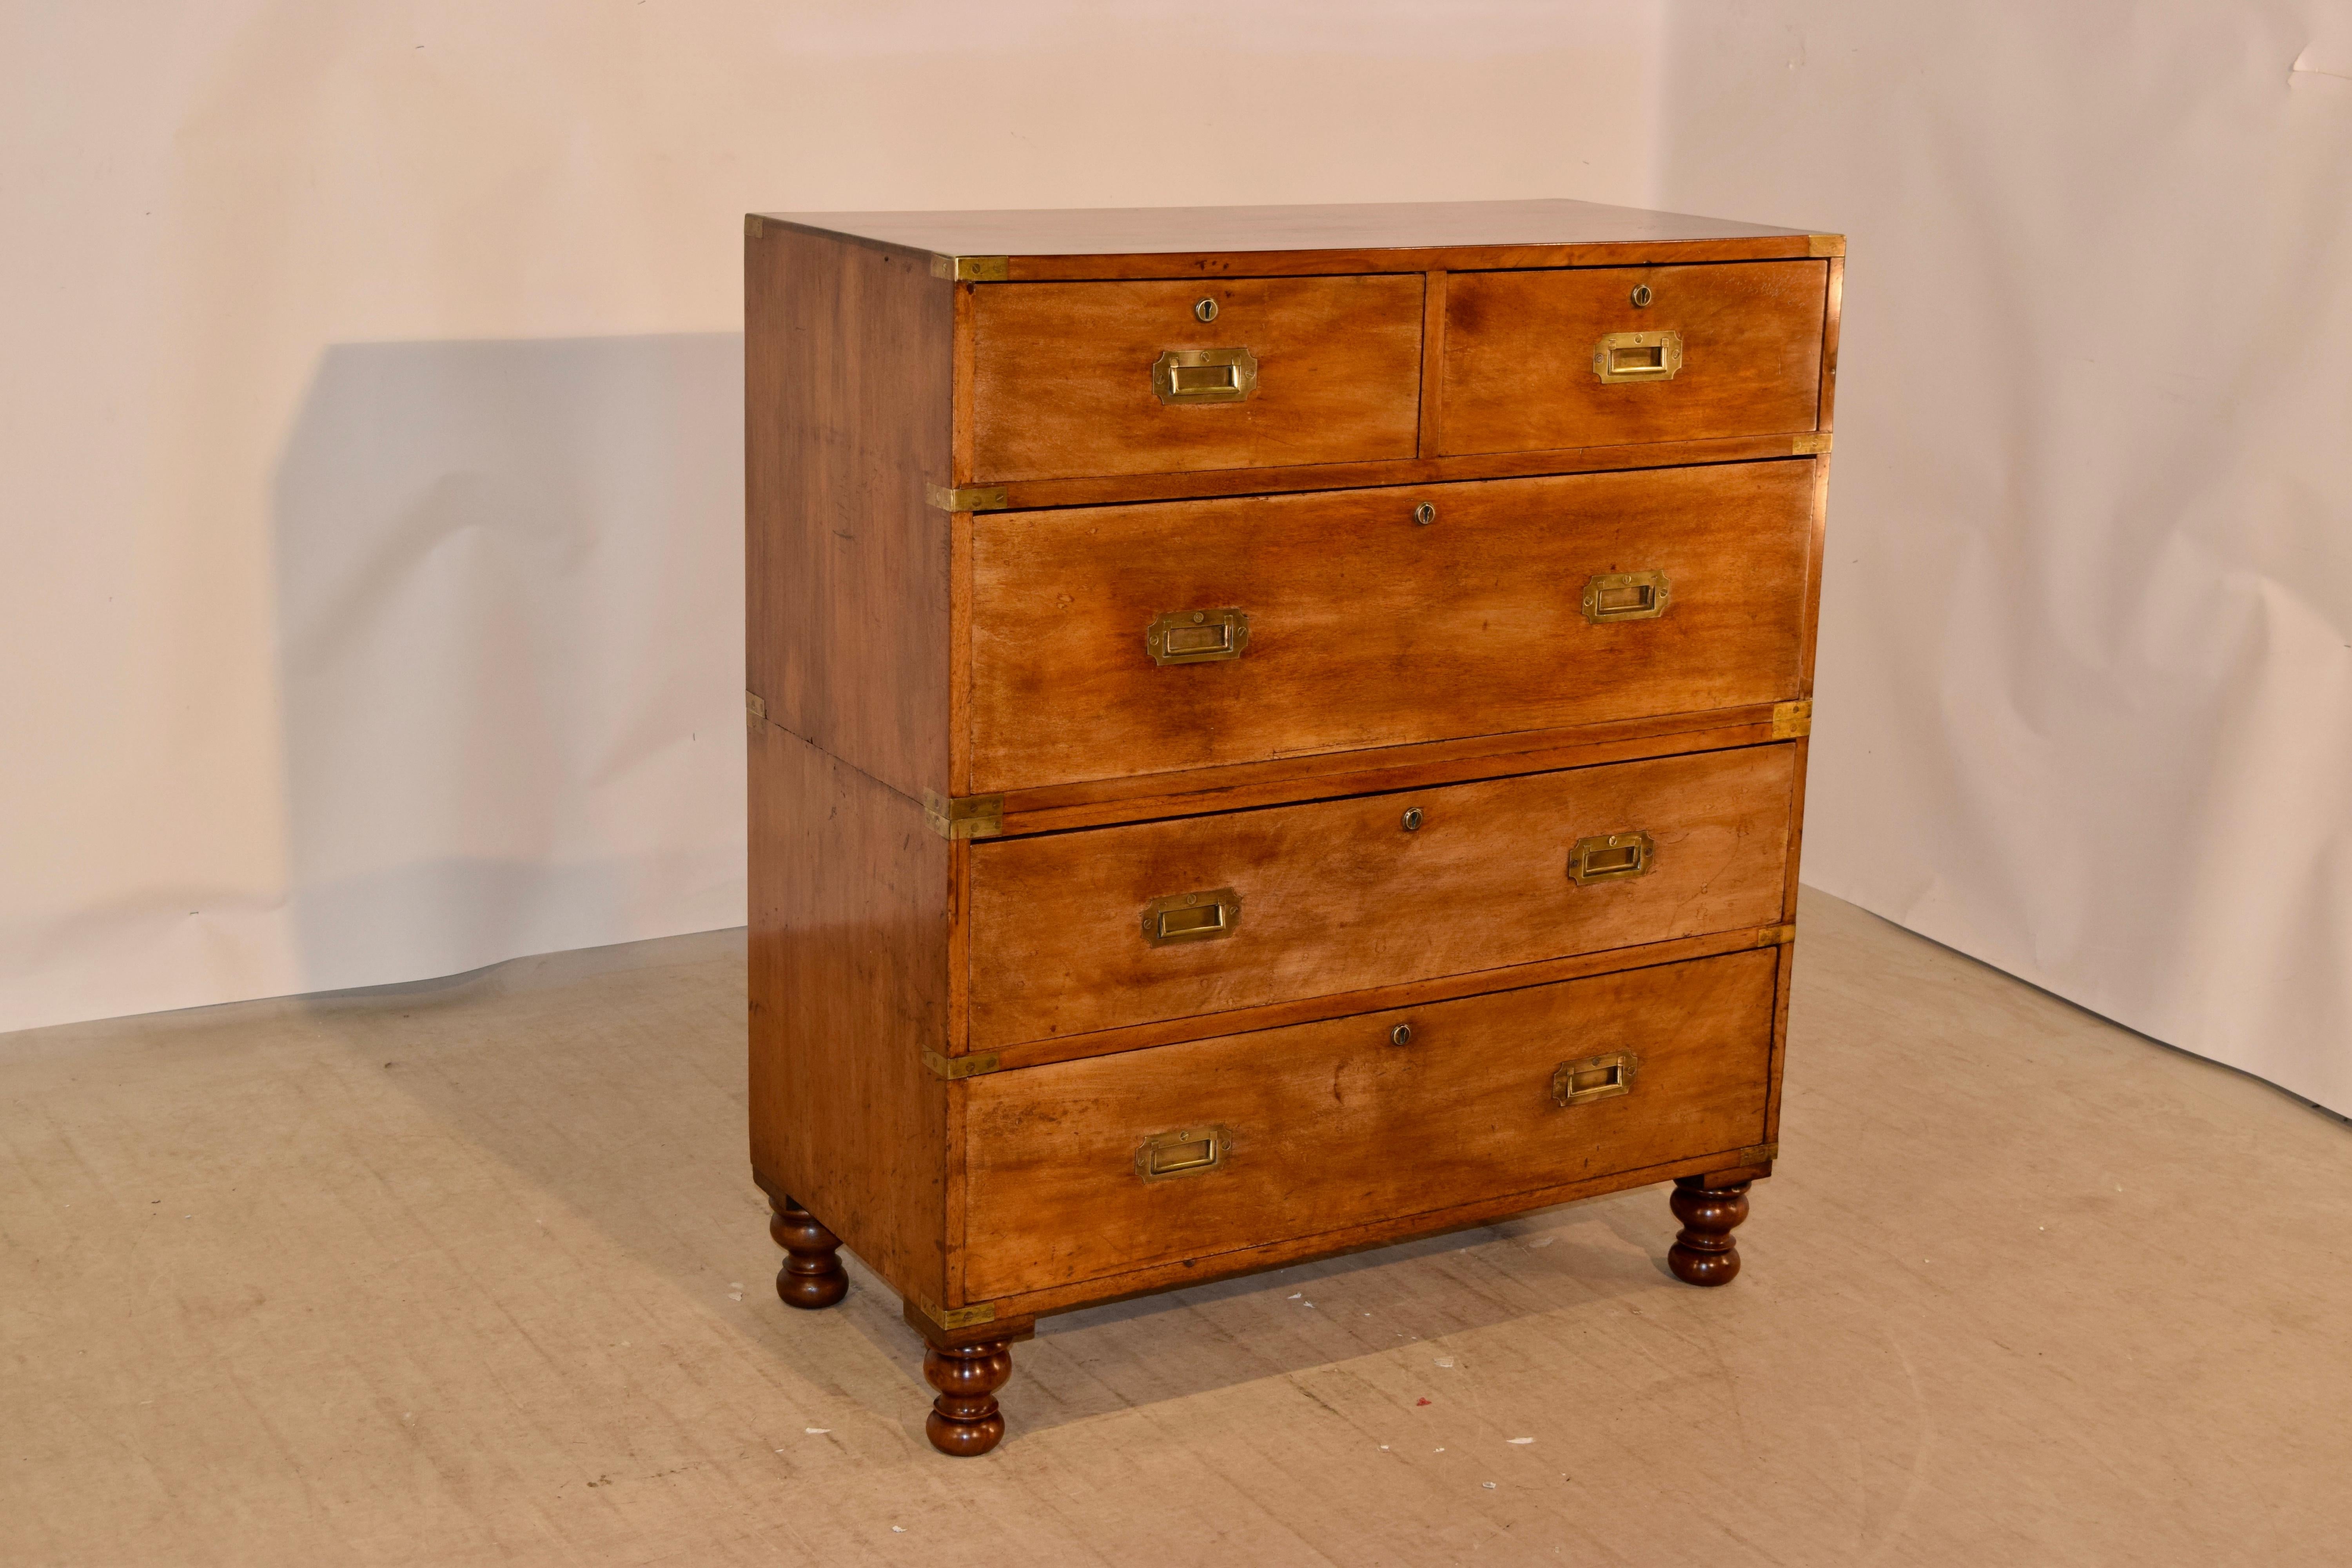 19th century campaign chest from England made from camphor wood. The corners and sides of the chest are banded with hand cast brass caps, which complement the hand cast brass handles and escutcheons. The case is simple in its elegance and is raised